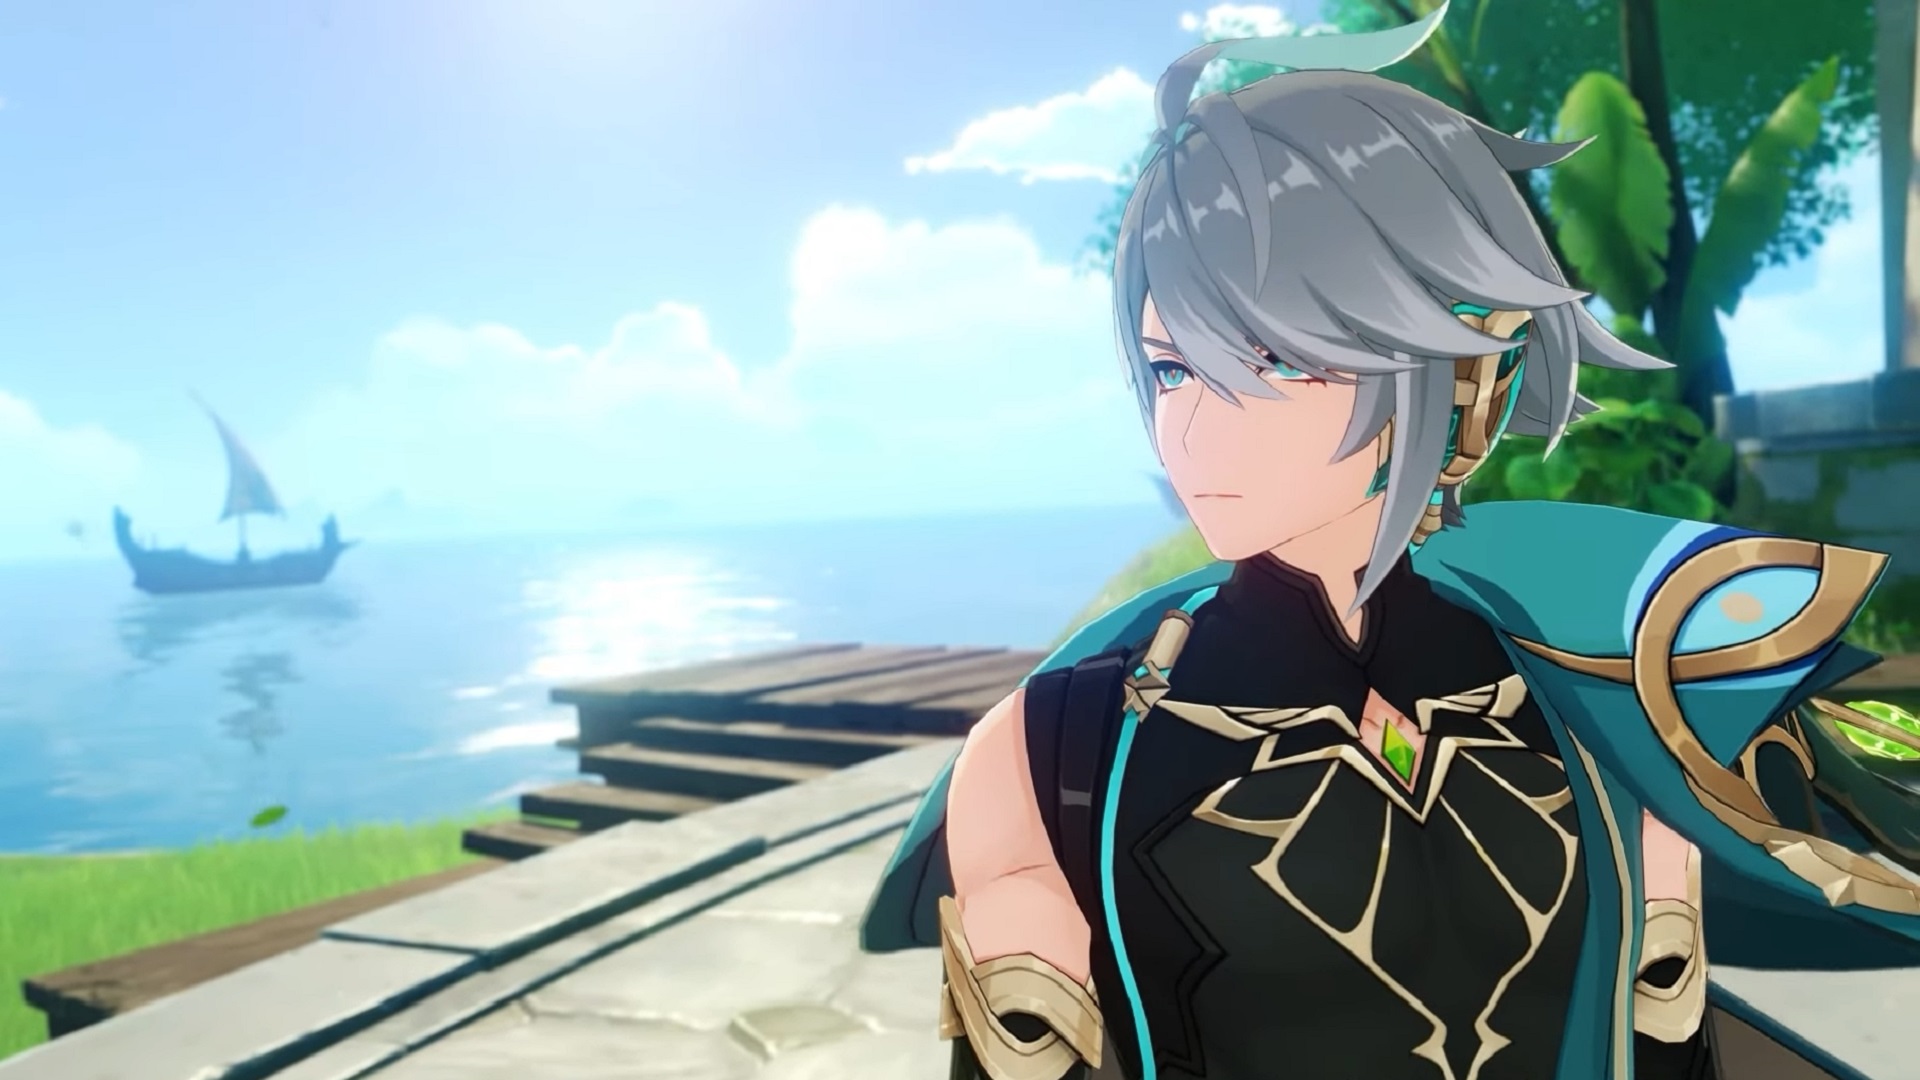 Upcoming Genshin Impact character alhaitham looks out over the sea